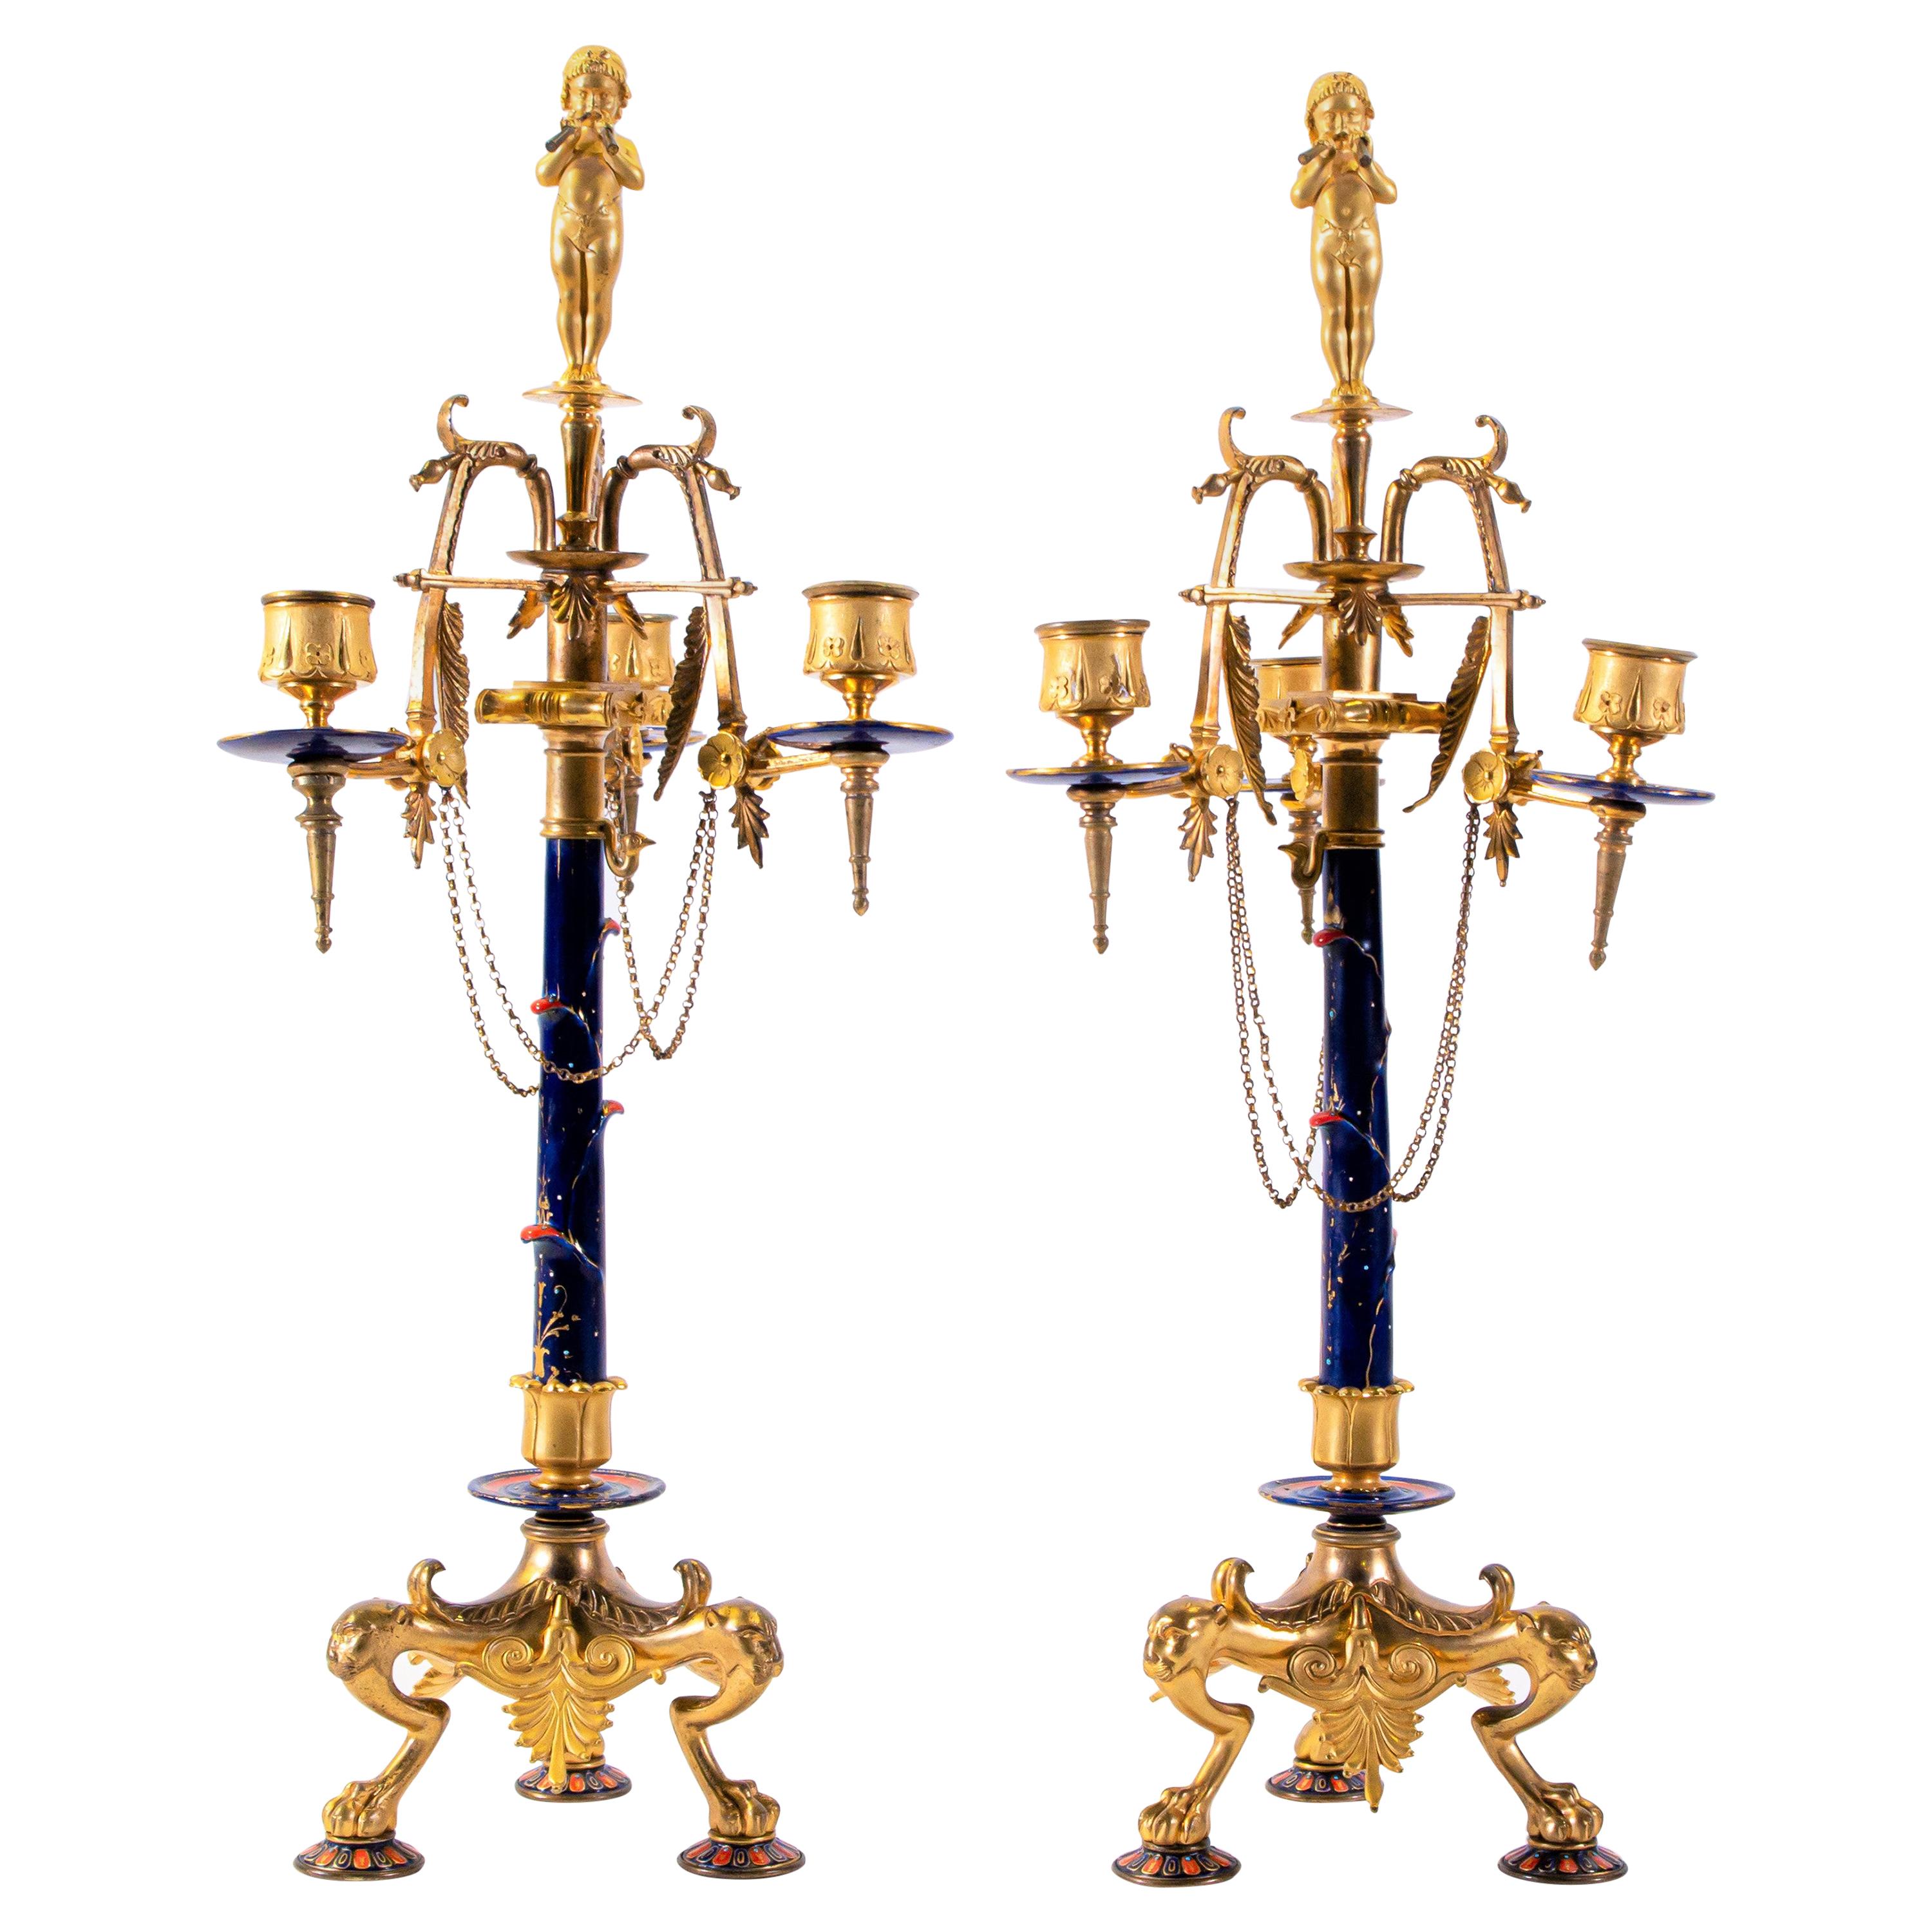 Pair of Neo-Grec Style 3-Arm Dore Bronze and Enamel Candelabras, F. Levillain